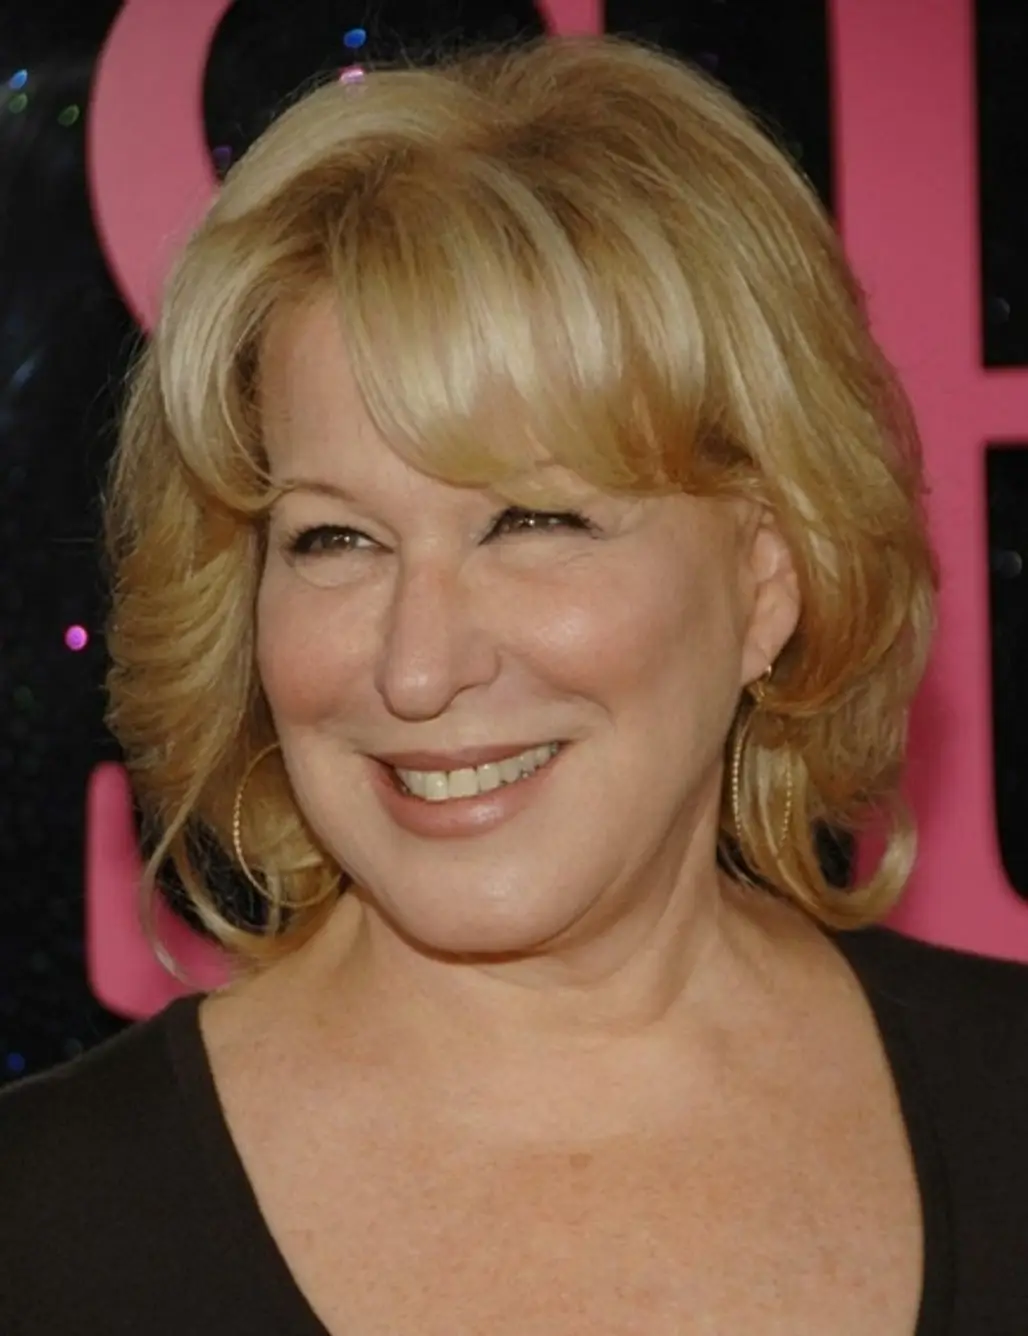 Bette Midler, American Singer, Actress, and Comedian